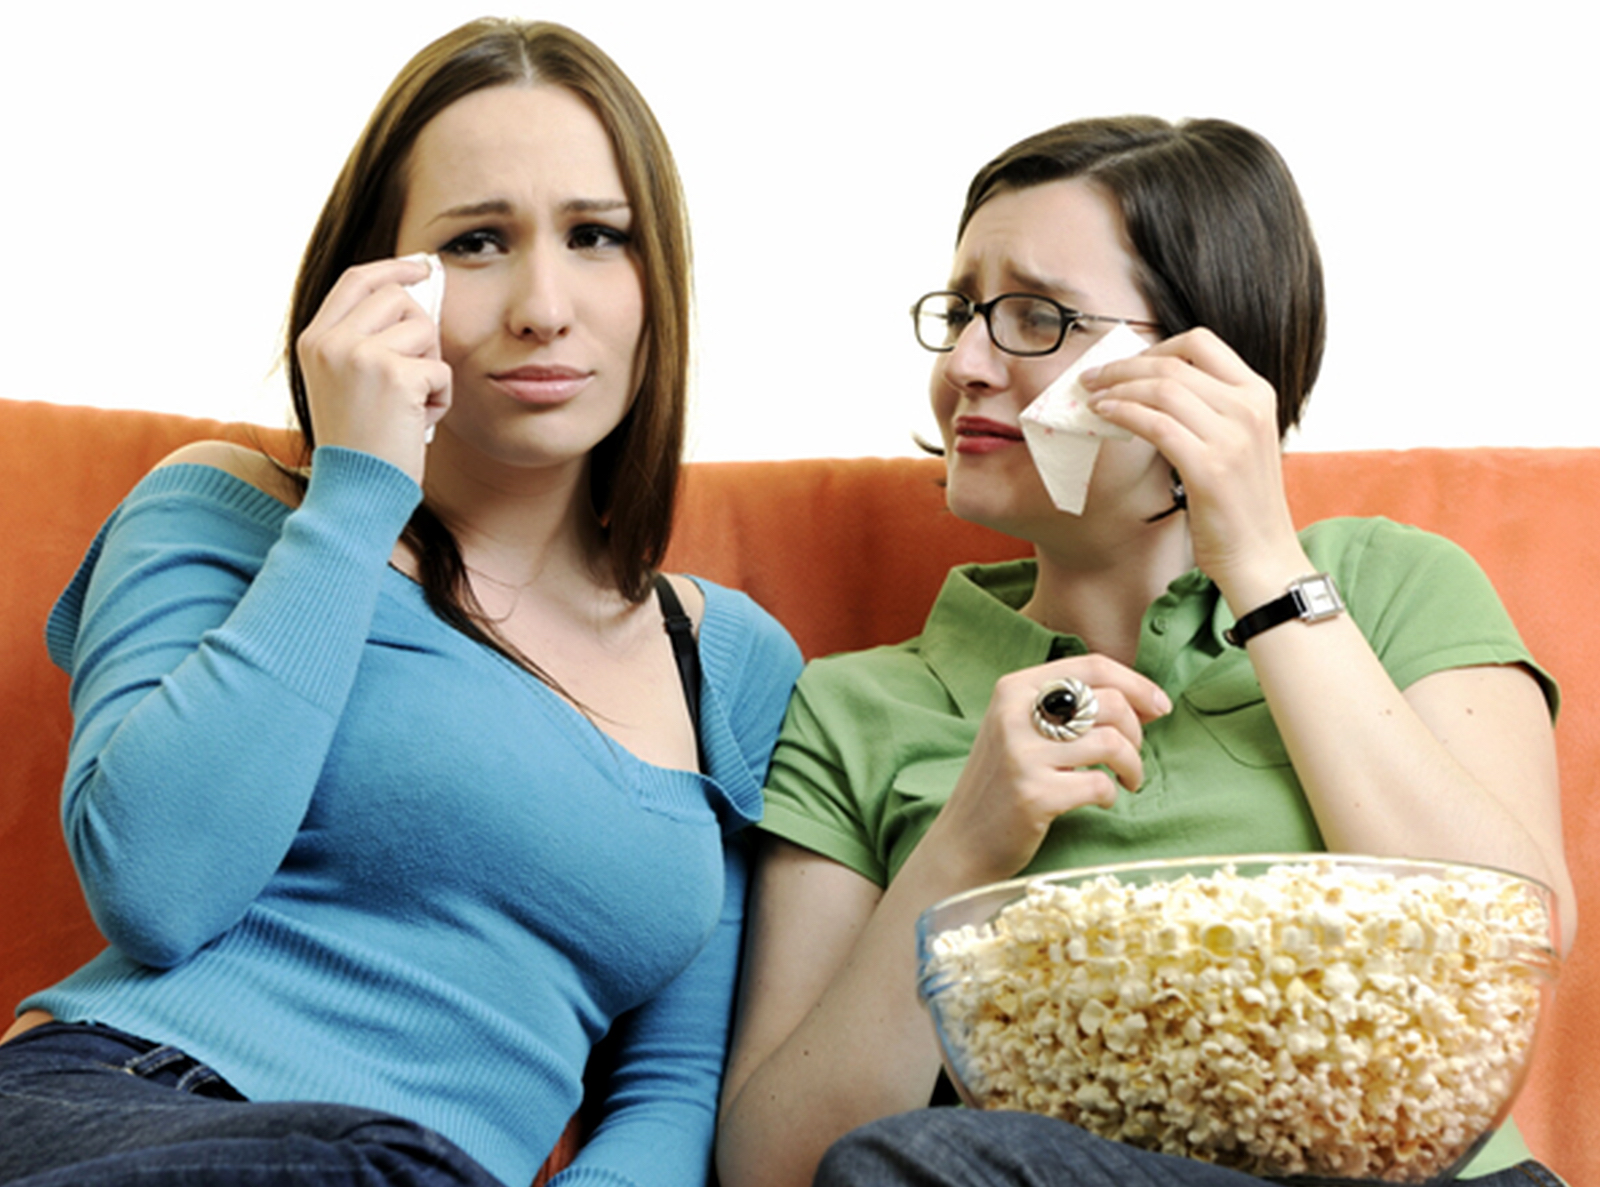 Empath Test person crying at movie